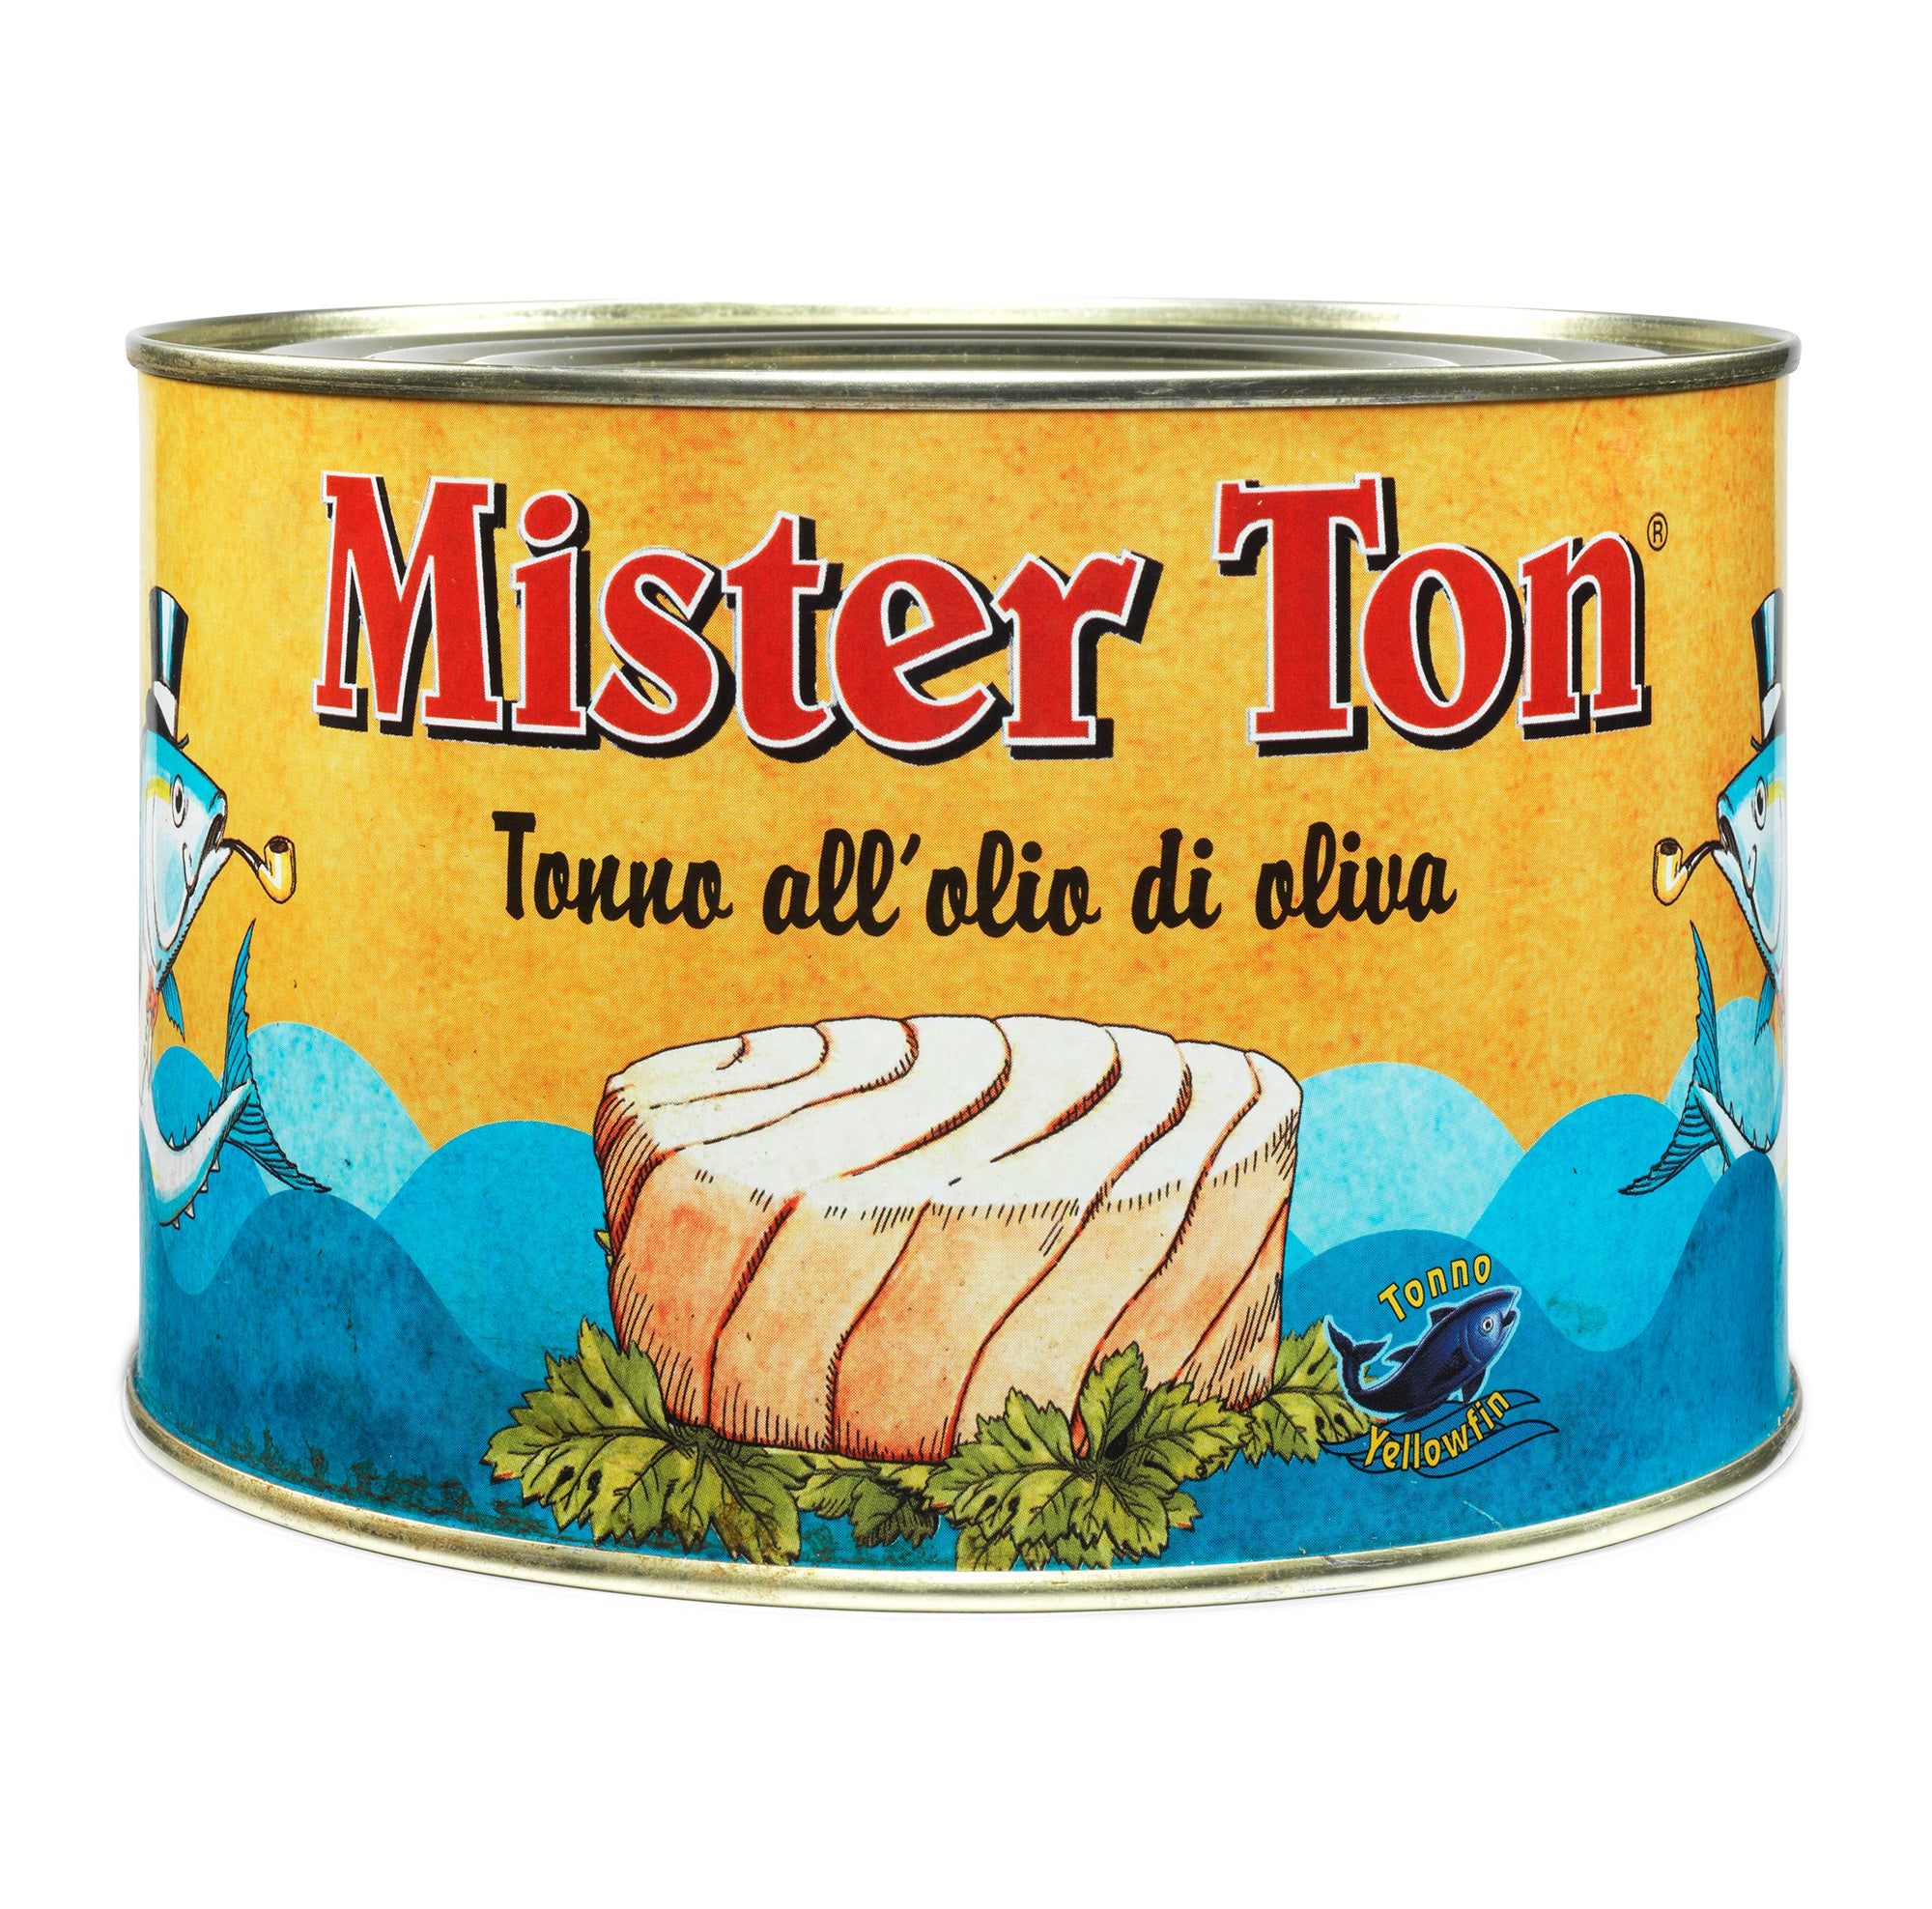 "MISTER TON" pieces of yellowfin tuna in olive oil 1,65 Kg